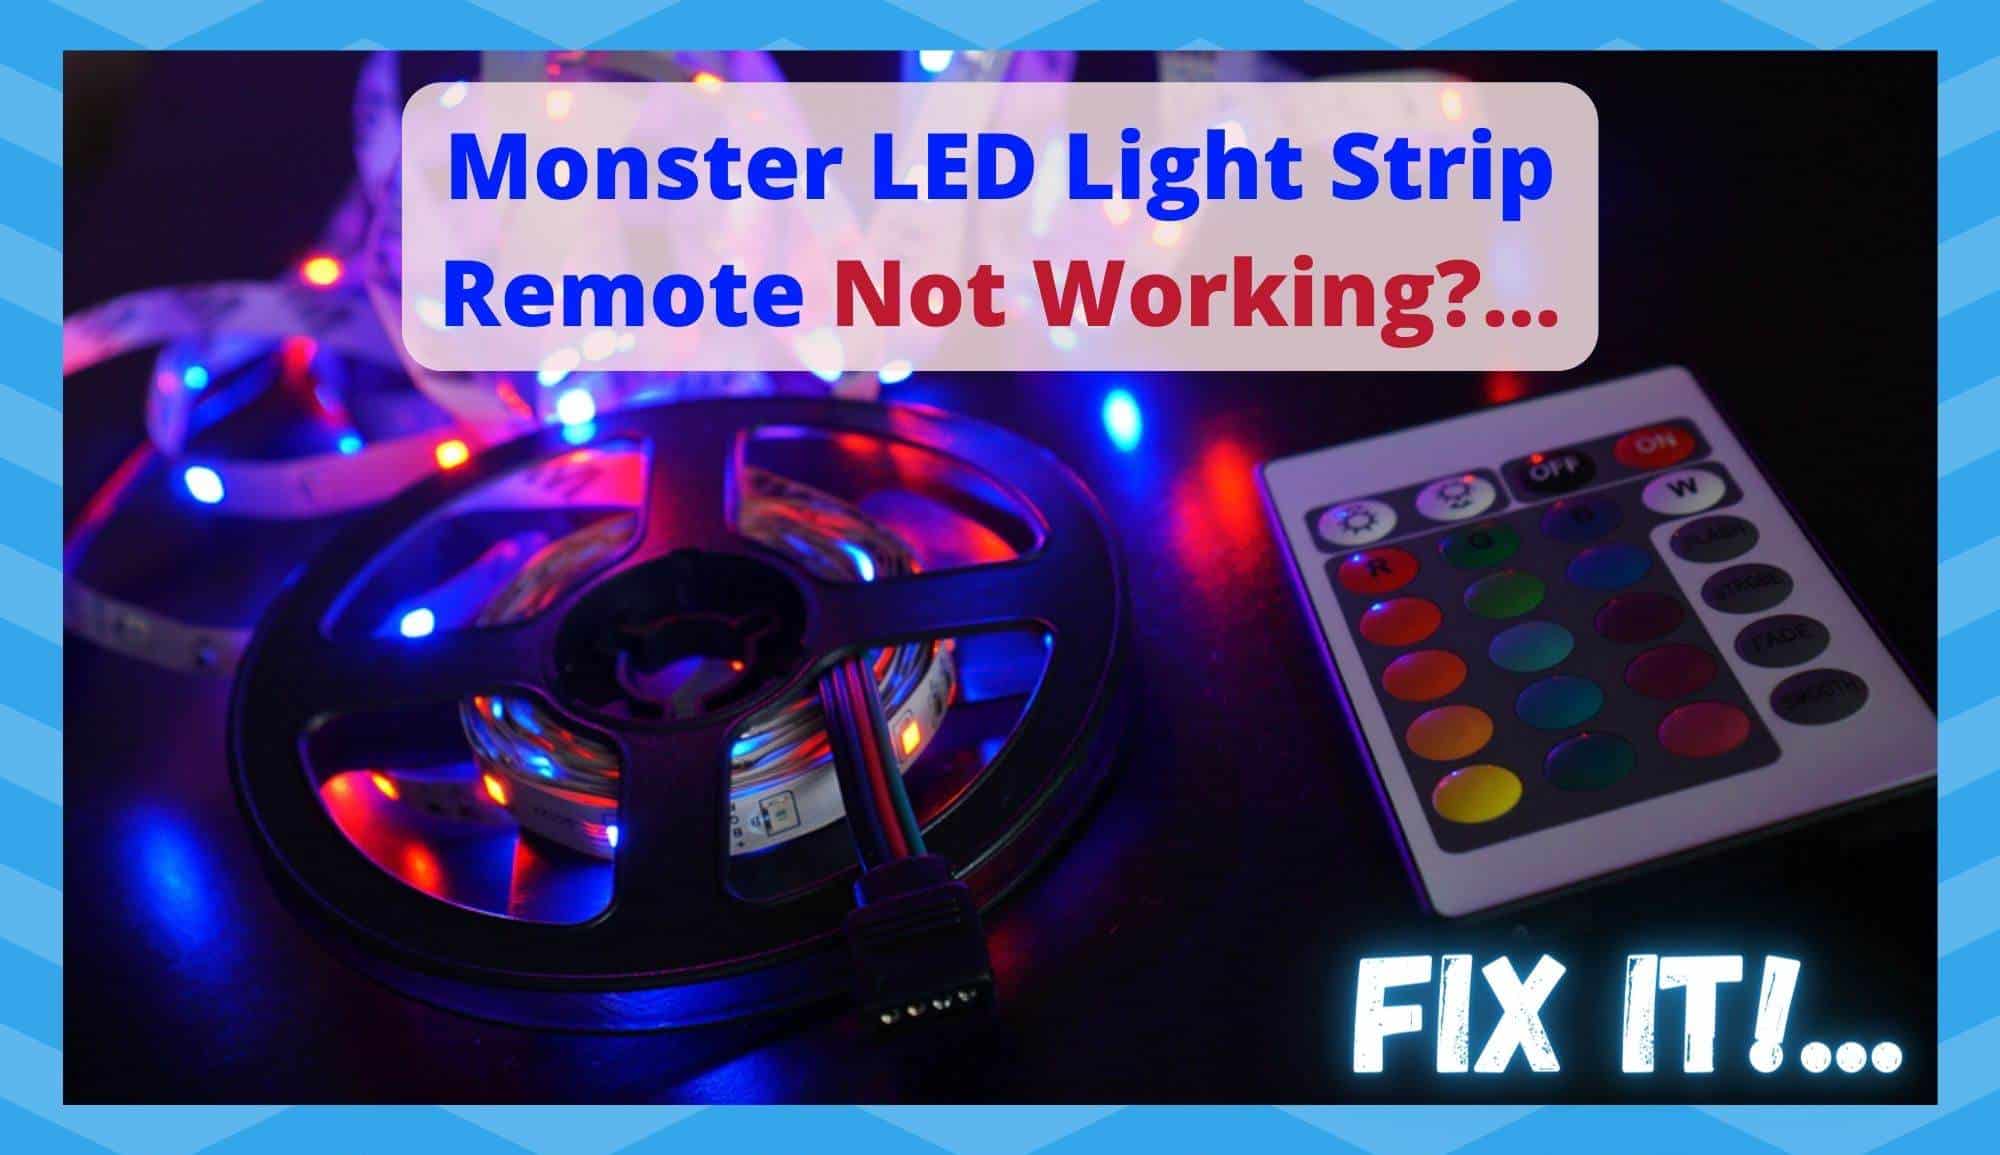 Why Isn't My LED Lights Remote Working?